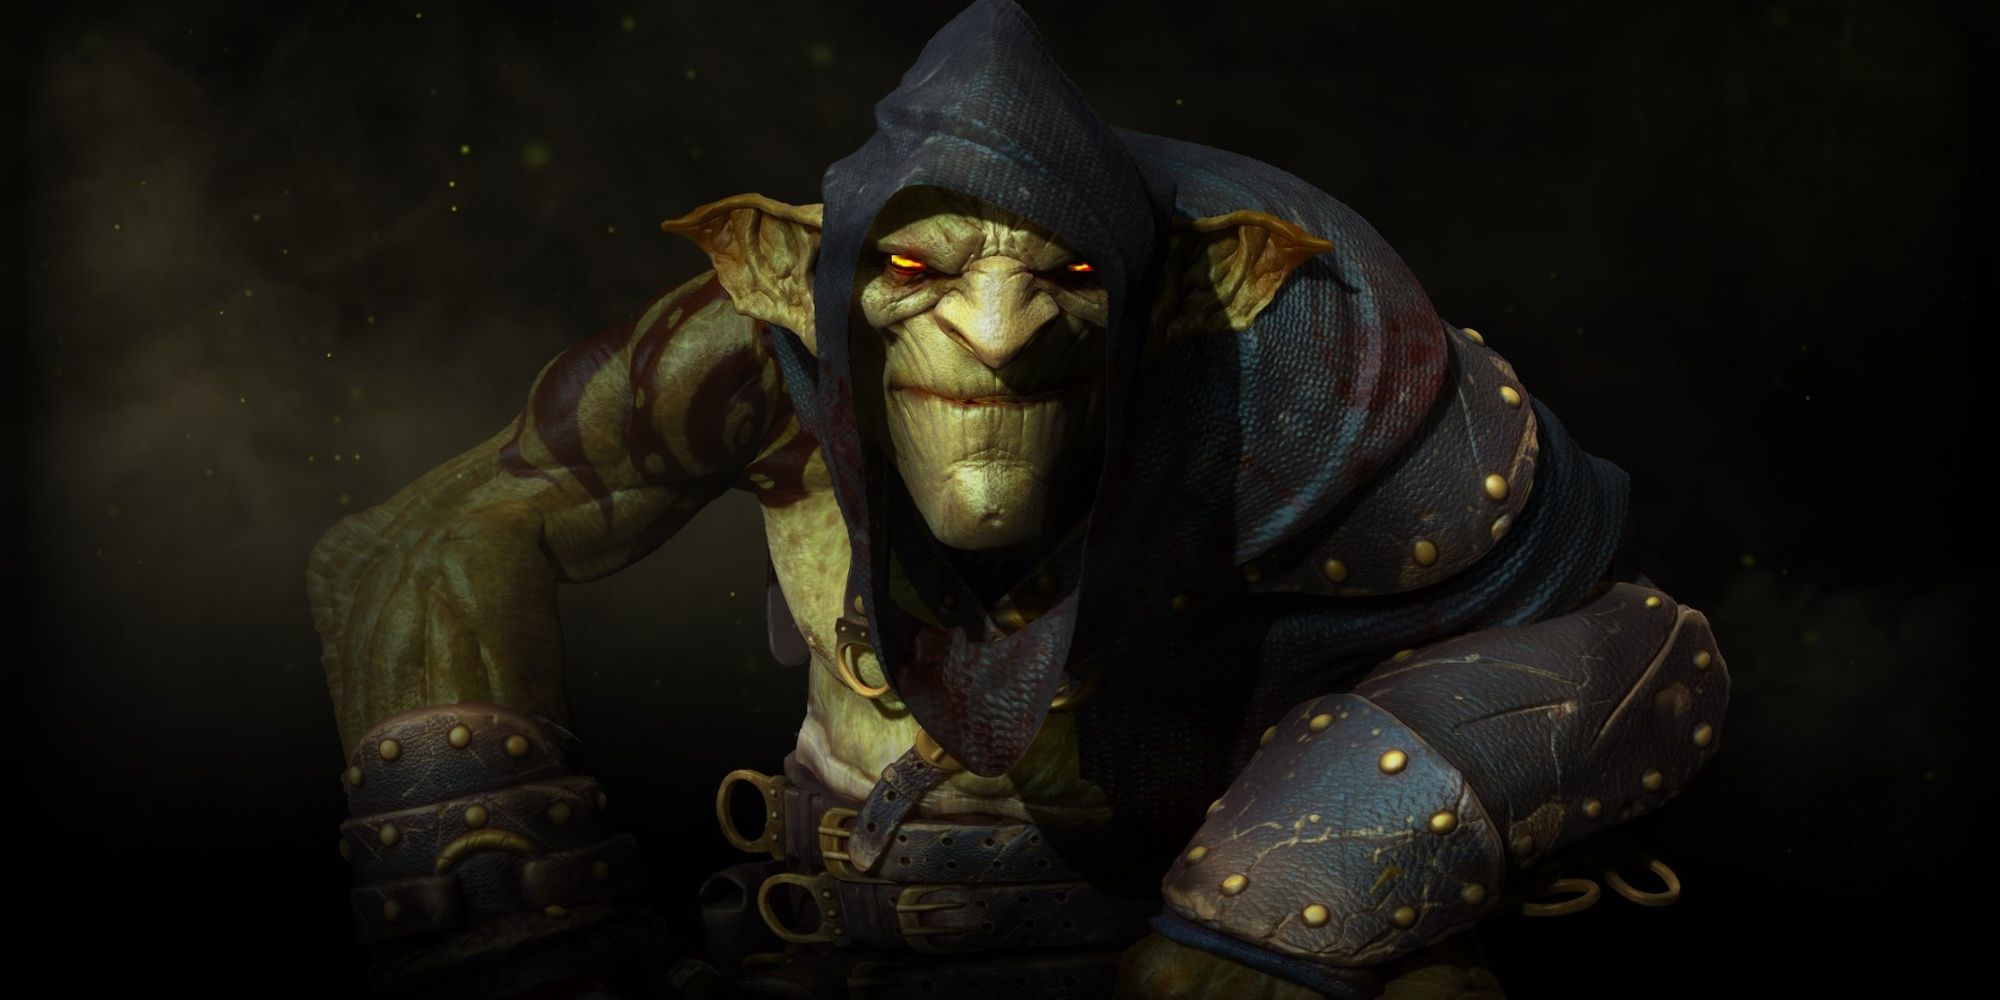 The Goblin Styx from Styx: Master of Shadows